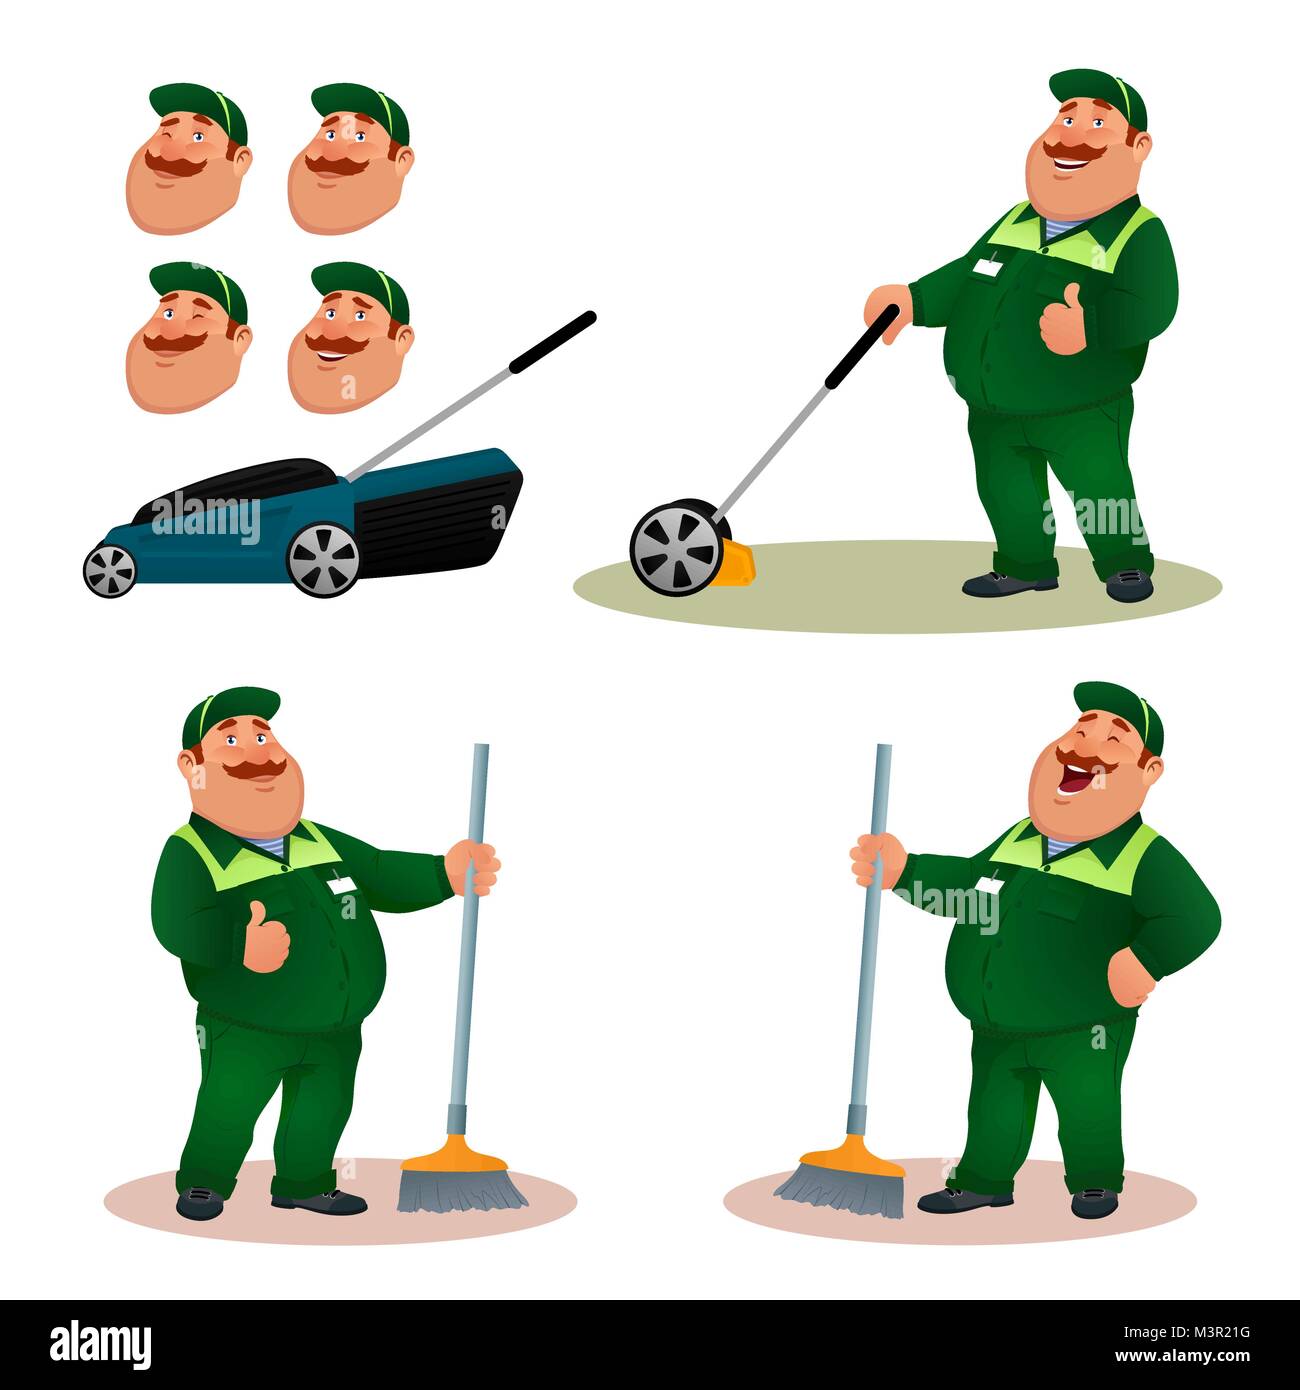 Funny cartoon janitor set with emotions. Smiling fat character gardener in green suit sweeping floor with broom. Happy flat cleaner with lawn mower and face expressions. Colorful vector illustration. Stock Vector